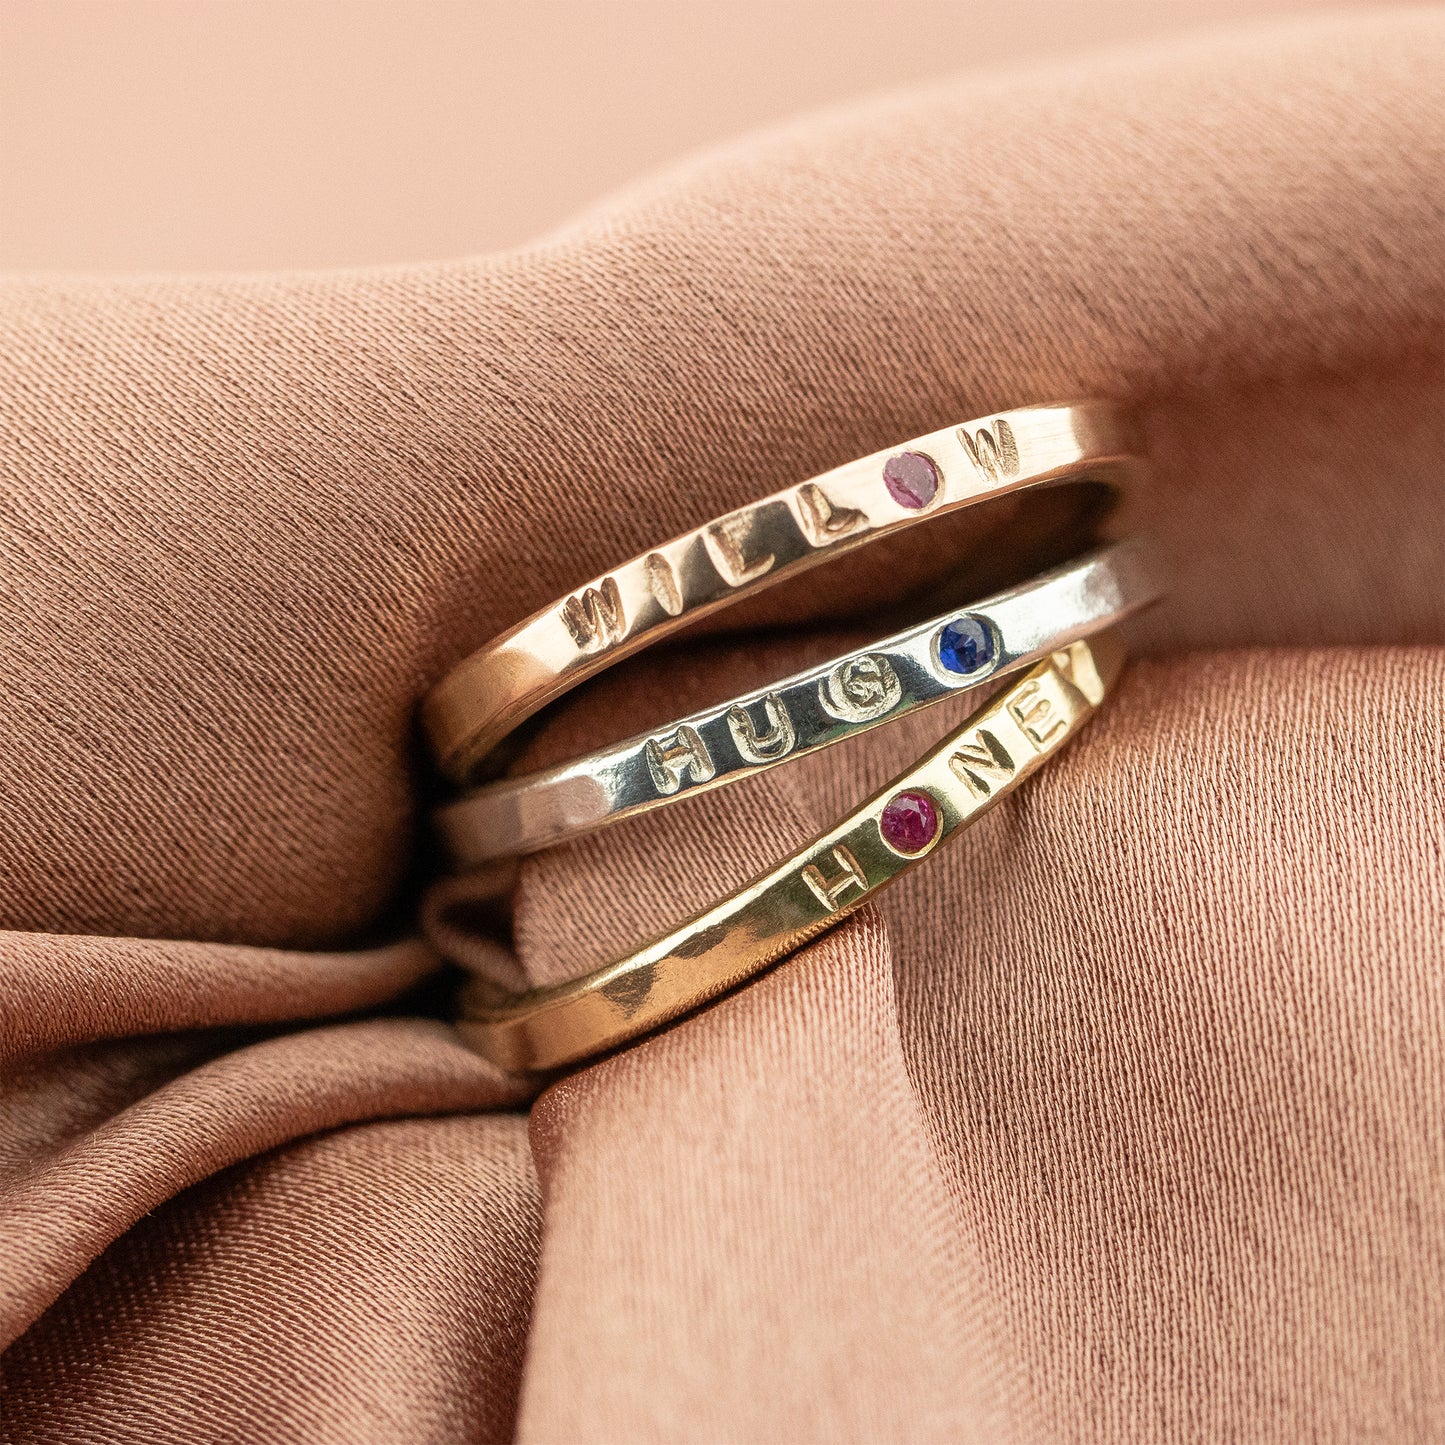 9kt Gold Personalised Family Name Rings with Birthstones